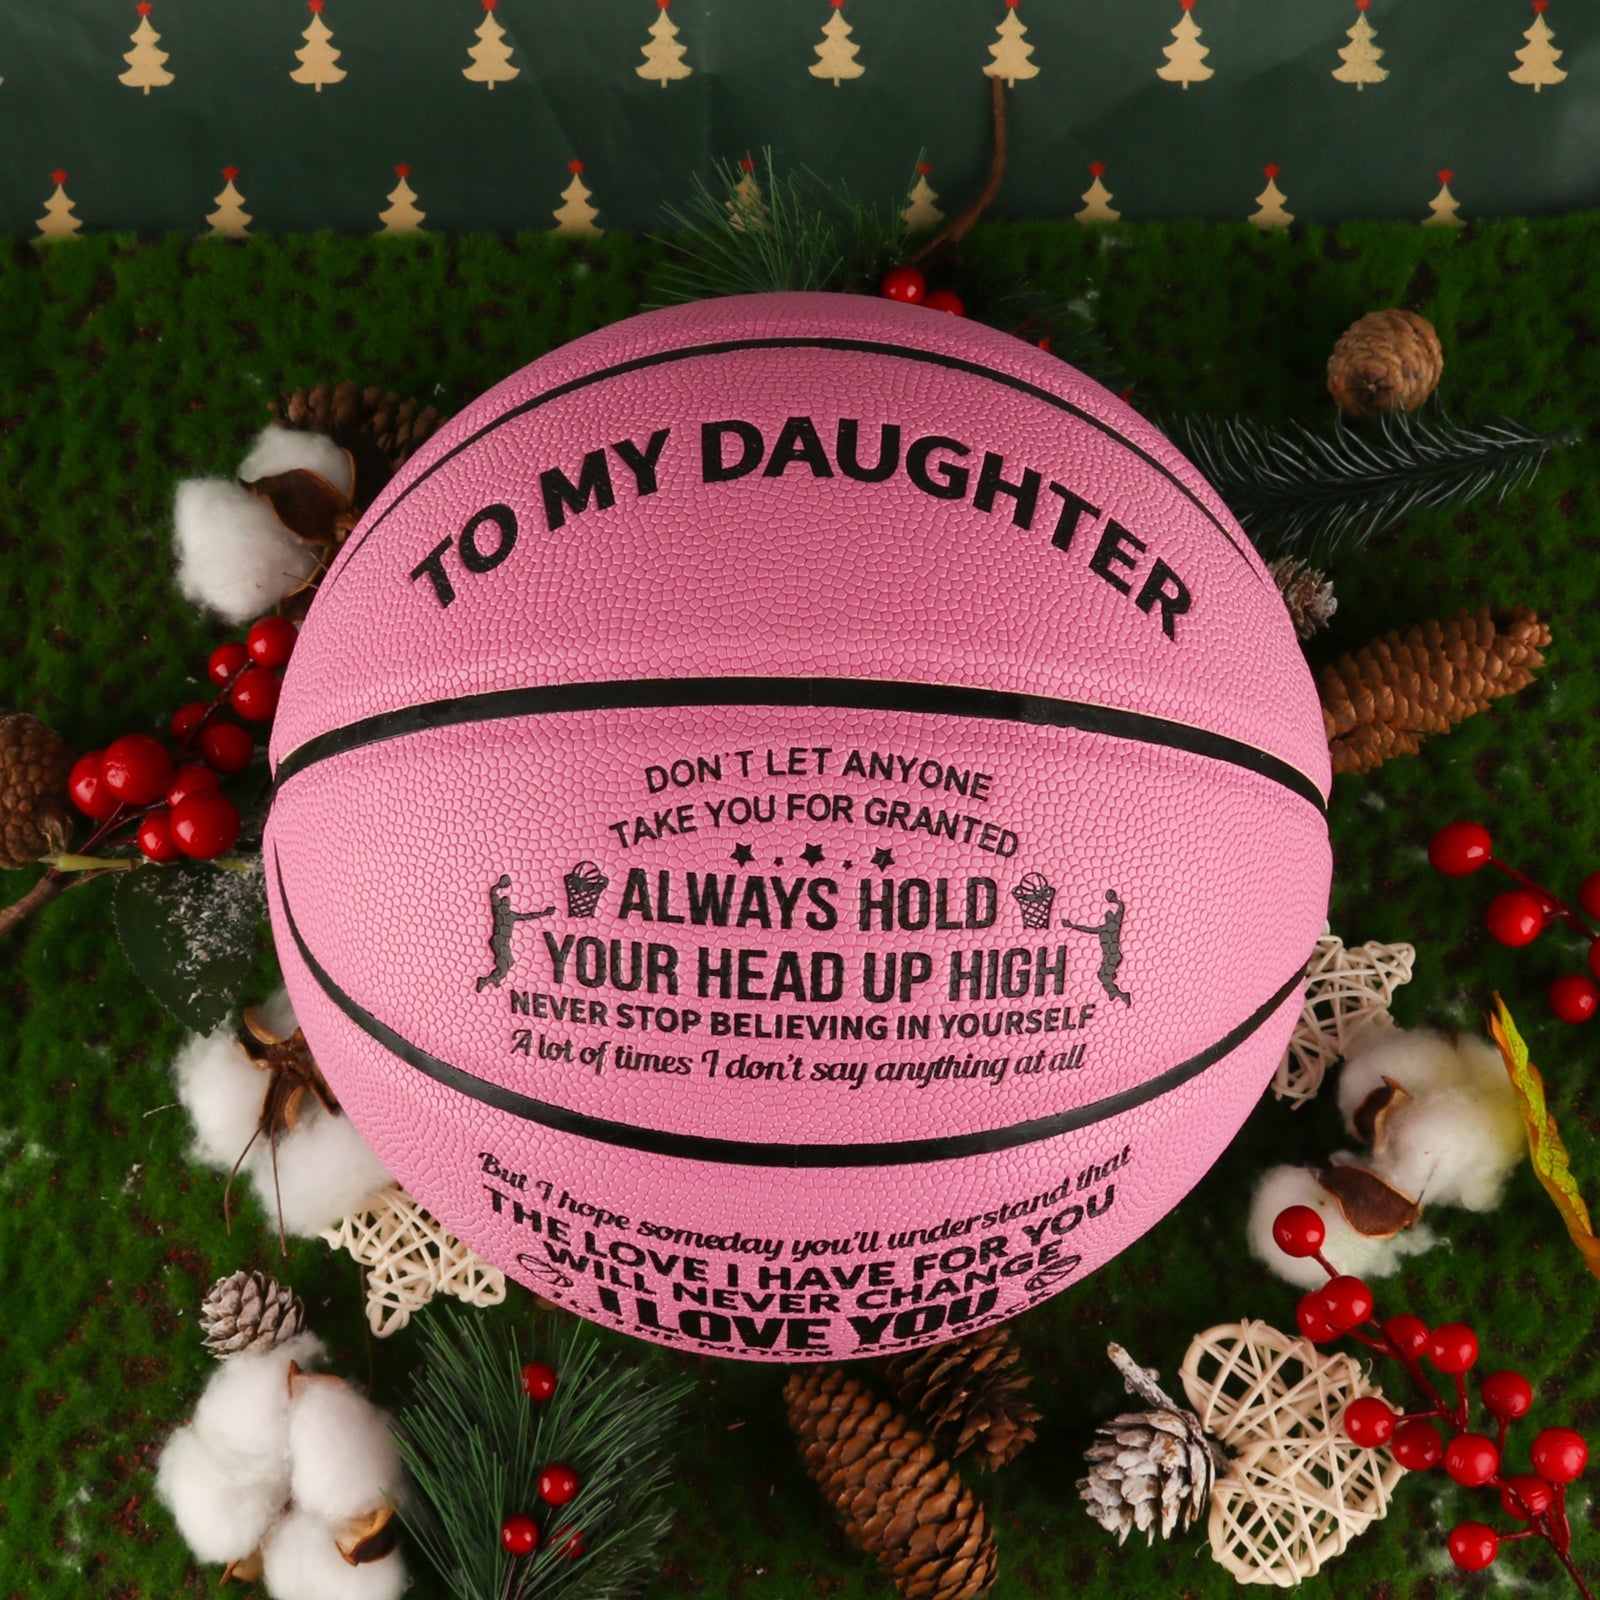 Personalized Letter Basketball For Daughter, Basketball Indoor/Outdoor Game Ball For Girl, Birthday Christmas Gift For Daughter, Pink - Family Watchs